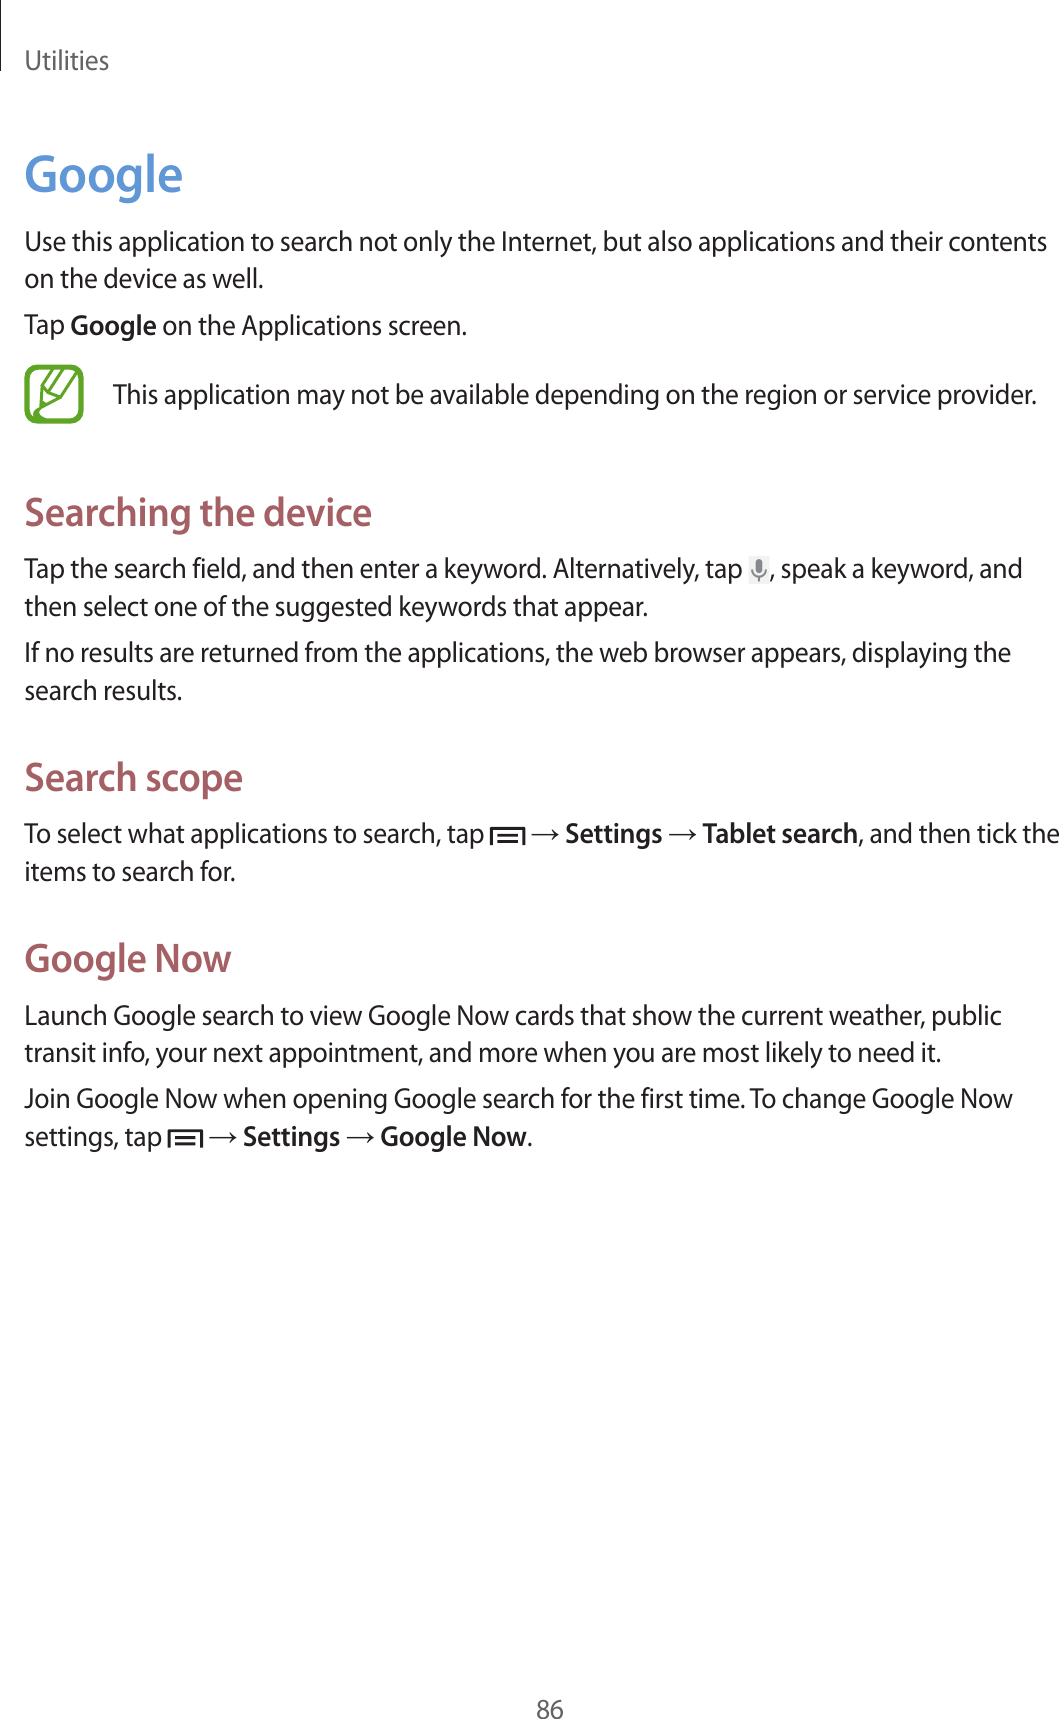 Utilities86GoogleUse this application to search not only the Internet, but also applications and their contents on the device as well.Tap Google on the Applications screen.This application may not be available depending on the region or service provider.Searching the deviceTap the search field, and then enter a keyword. Alternatively, tap  , speak a keyword, and then select one of the suggested keywords that appear.If no results are returned from the applications, the web browser appears, displaying the search results.Search scopeTo select what applications to search, tap   → Settings → Tablet search, and then tick the items to search for.Google NowLaunch Google search to view Google Now cards that show the current weather, public transit info, your next appointment, and more when you are most likely to need it.Join Google Now when opening Google search for the first time. To change Google Now settings, tap   → Settings → Google Now.